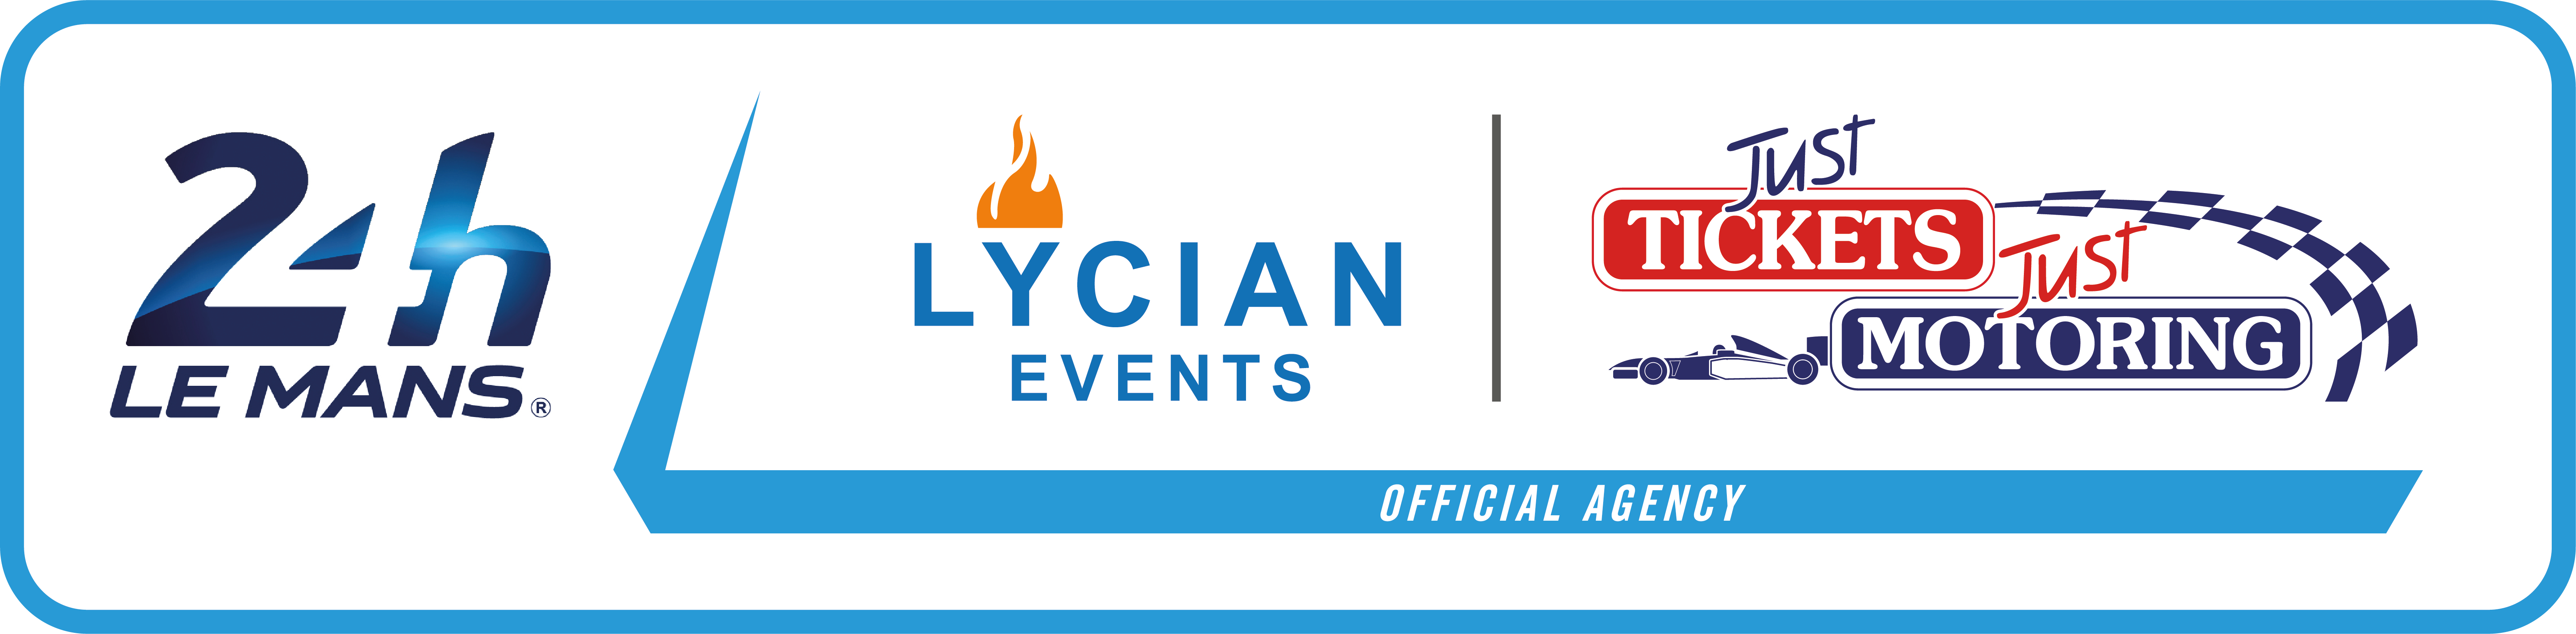 Lycian Events